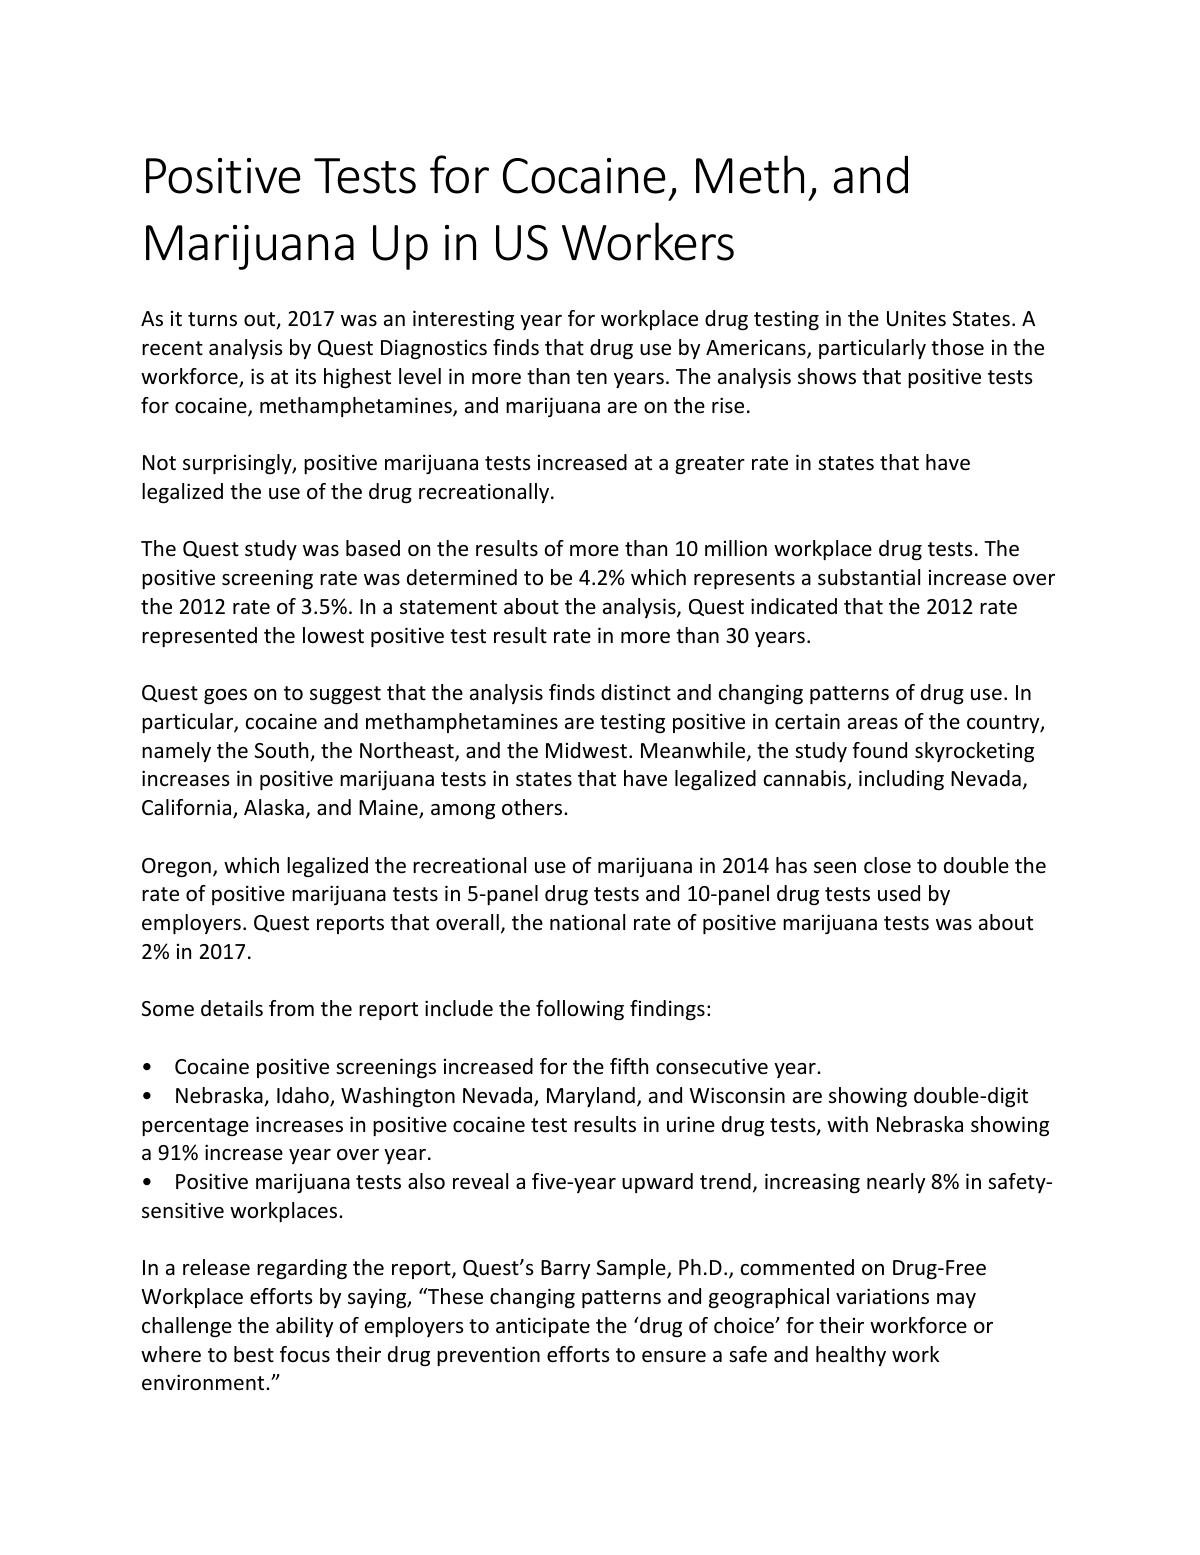 Positive Tests for Cocaine, Meth, and Marijuana Up in US Workers